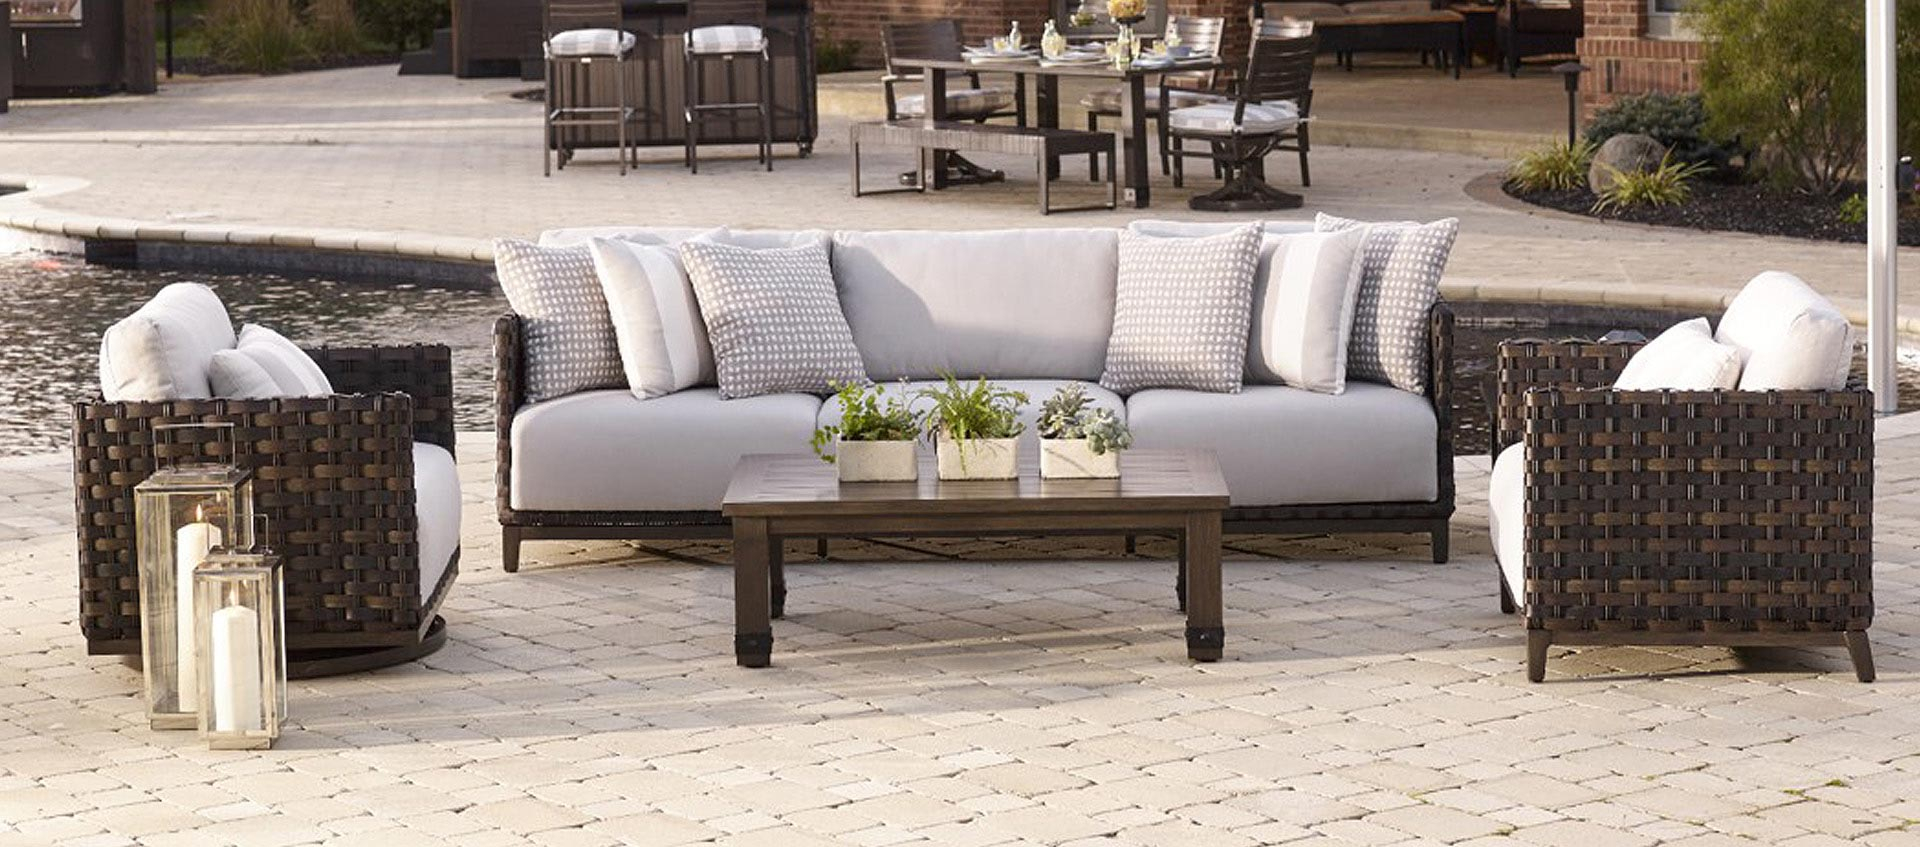 All American Outdoor Living Patio Furniture with regard to dimensions 1920 X 847